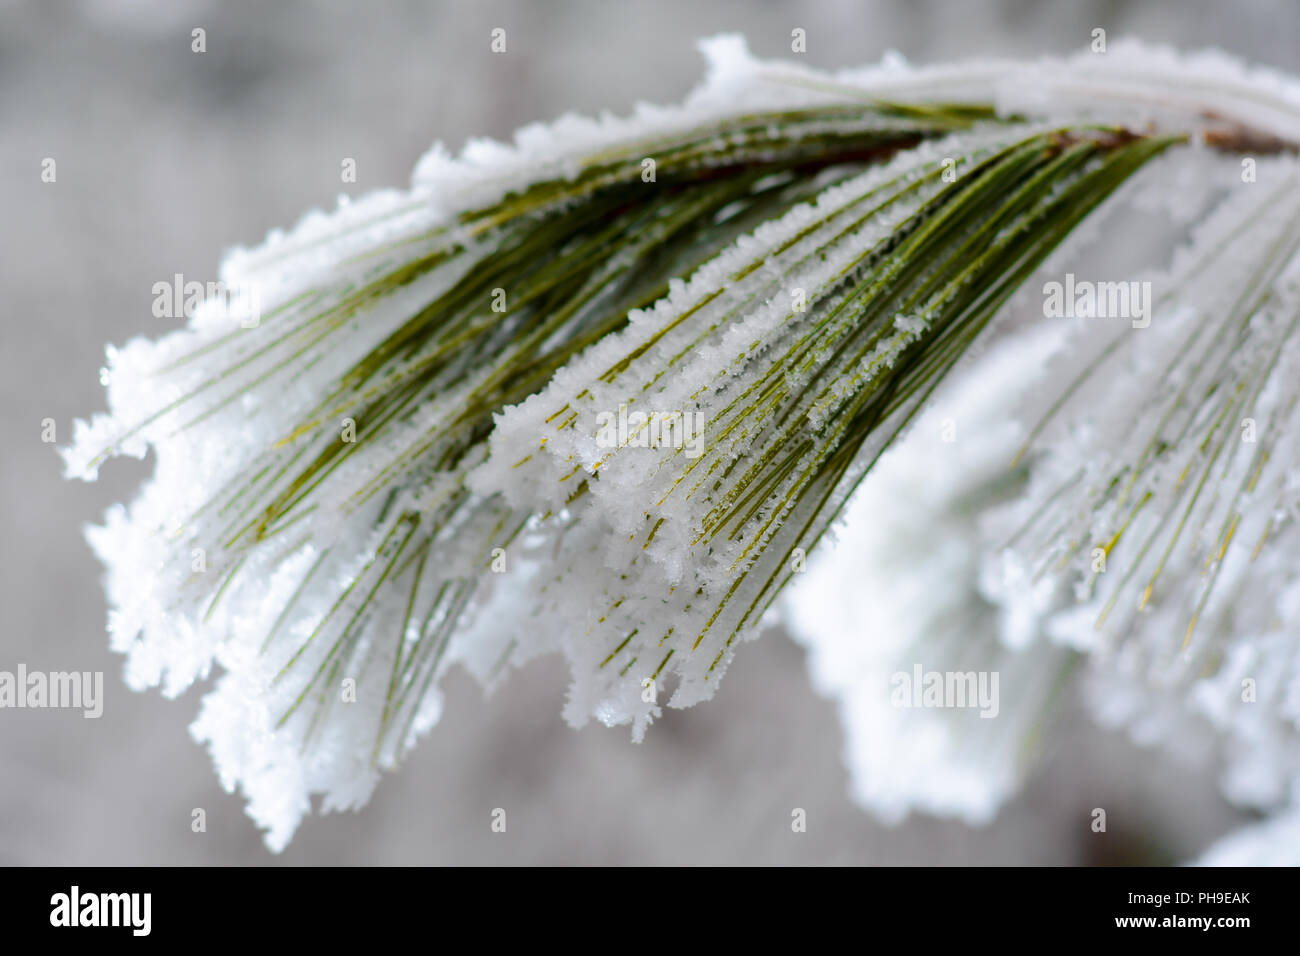 Snow Covered Pine Tree Branches Stock Photo